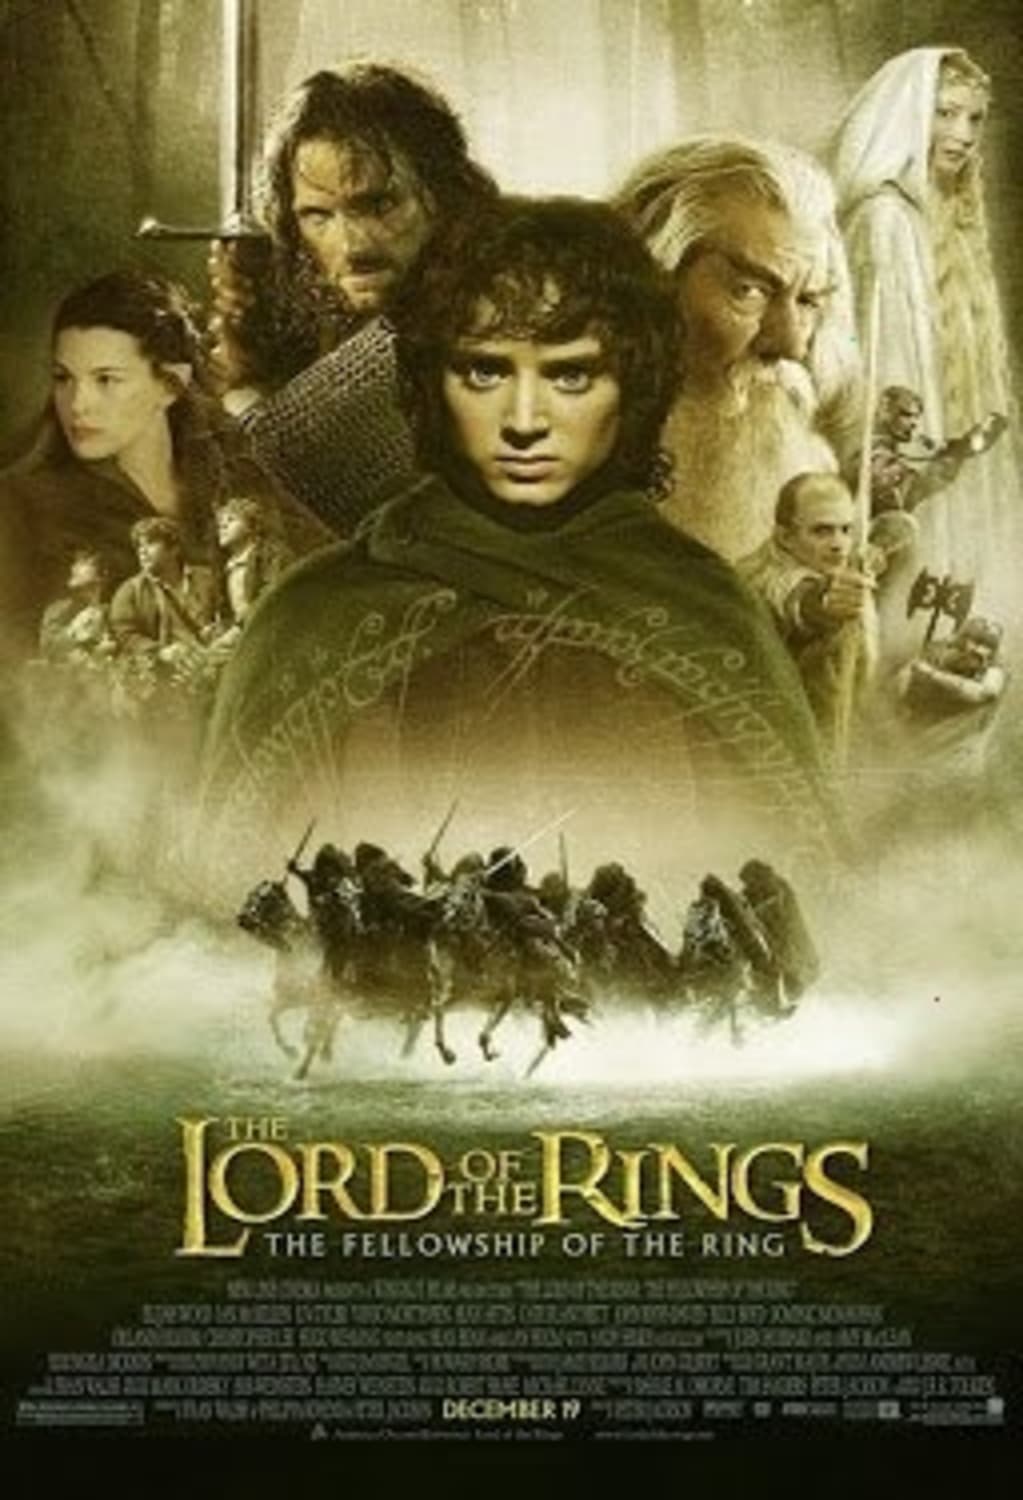 The Lord Of The Rings: The Return Of The King (DVD) on MovieShack